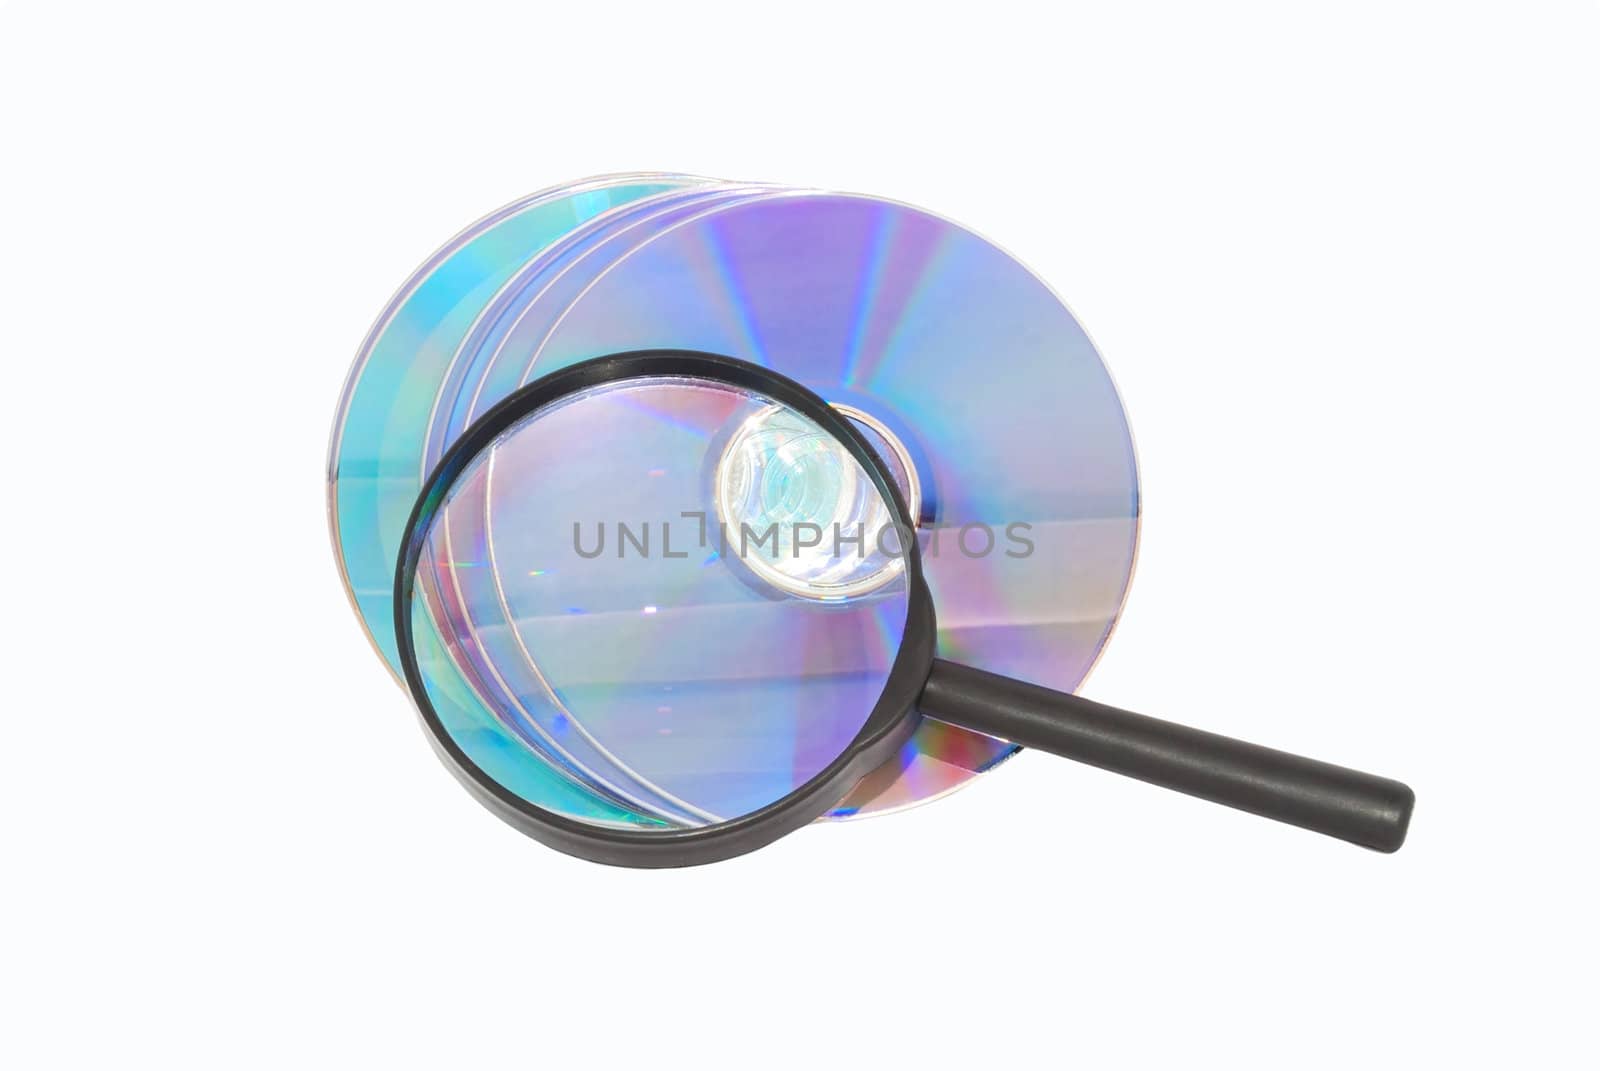 inspecting a dvd with a magnifying glass